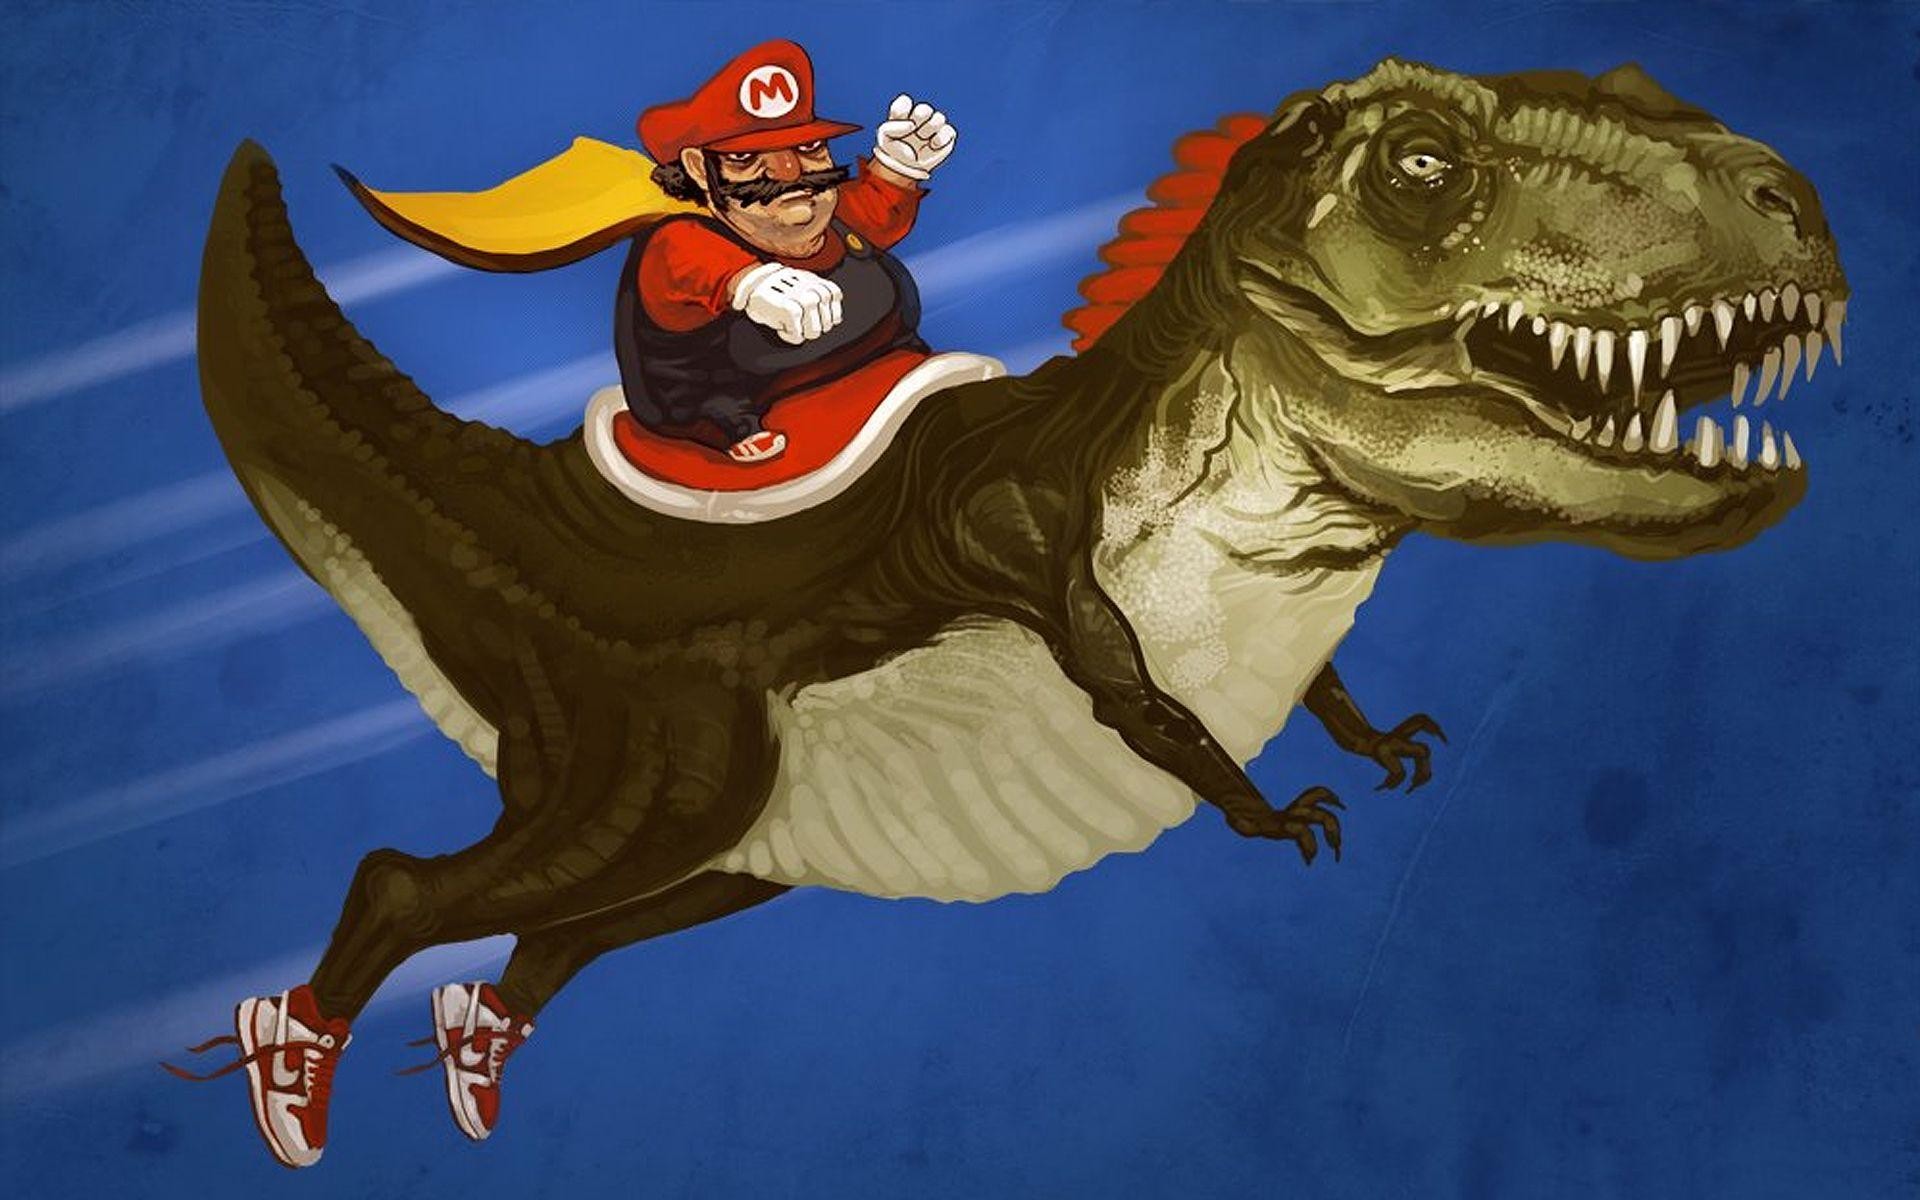 1920x1200 Super Mario Bros. images Mario vs Bowser wallpaper and background .